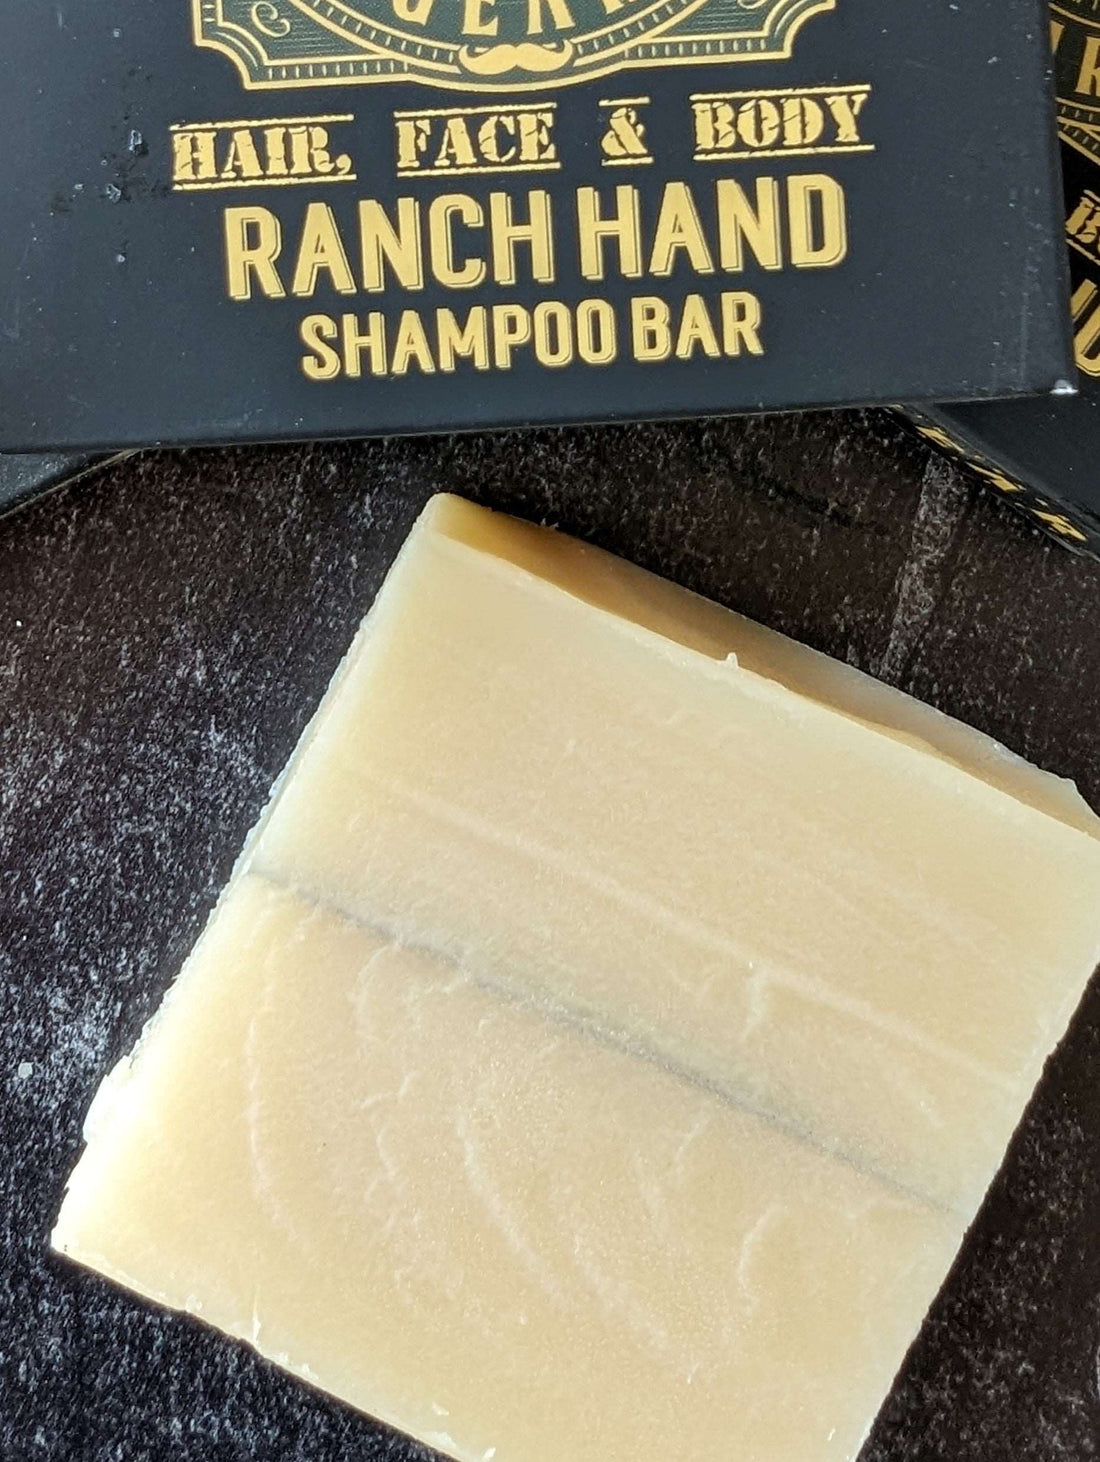 Ranch Hand All-In-One Hair, Face & Body Shampoo Bar for Men top view with the box and logo